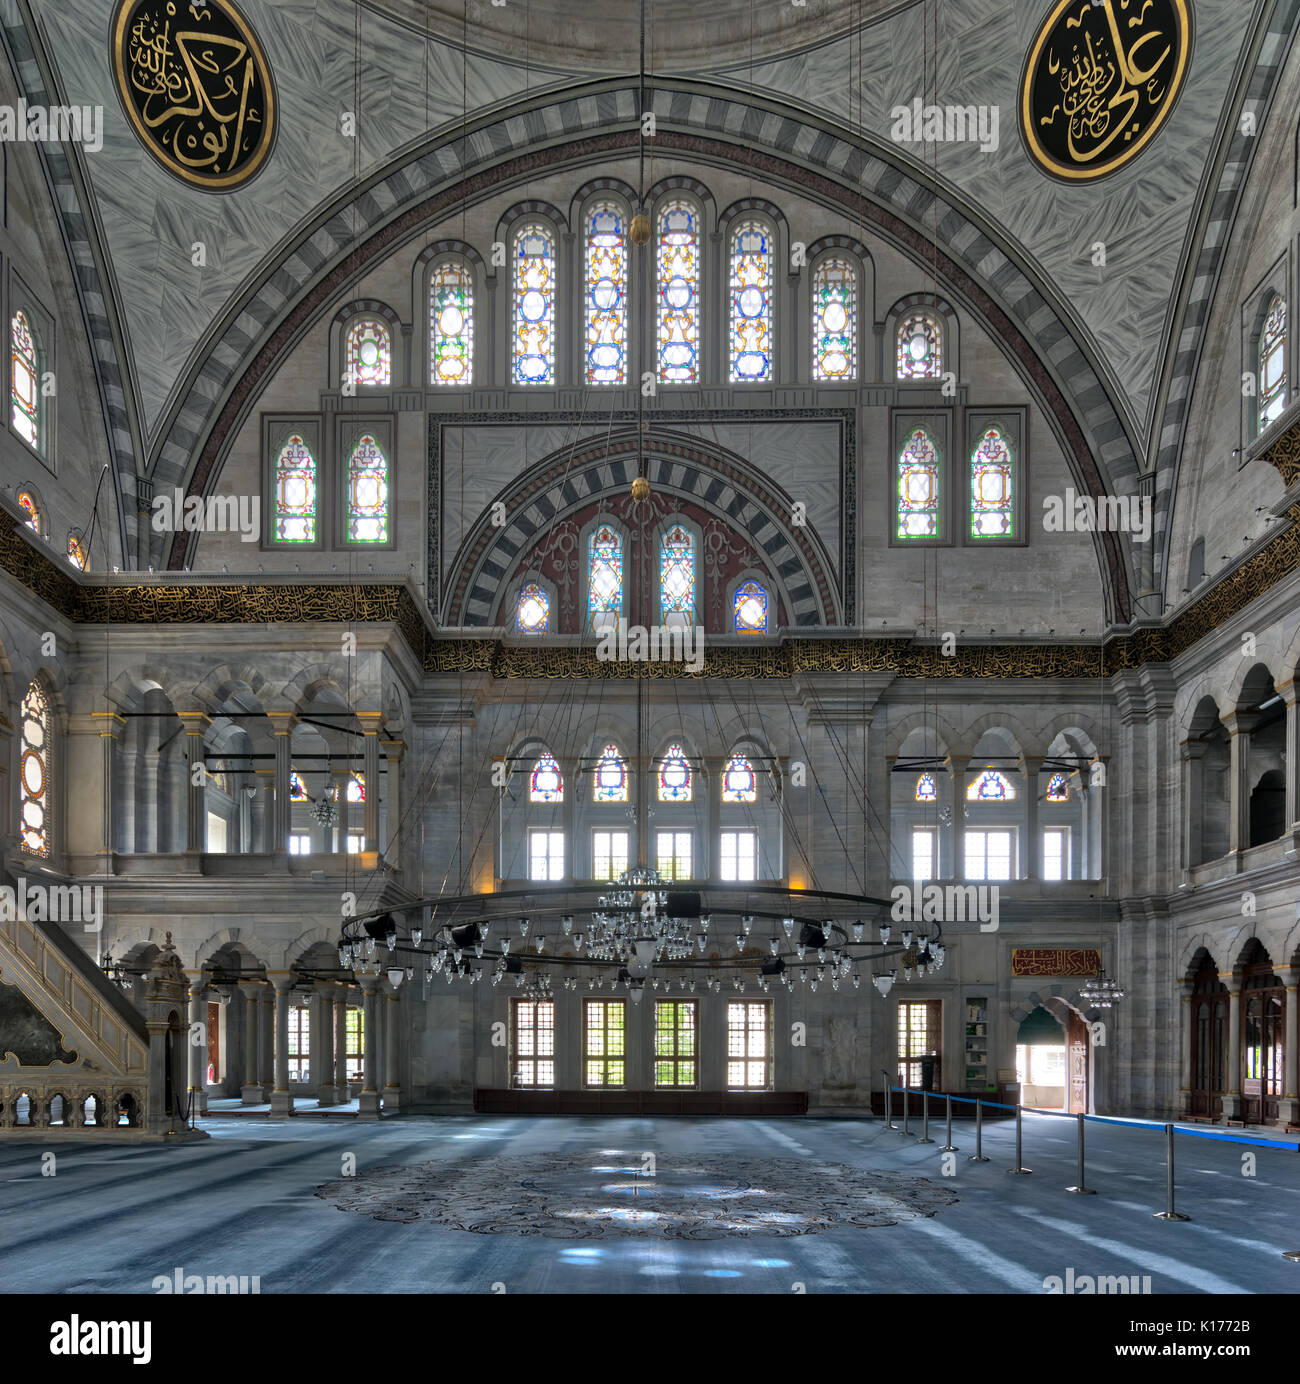 Interior facade of Nuruosmaniye Mosque, an Ottoman Baroque style mosque completed in 1755, with a huge arch & many colored stained glass windows locat Stock Photo